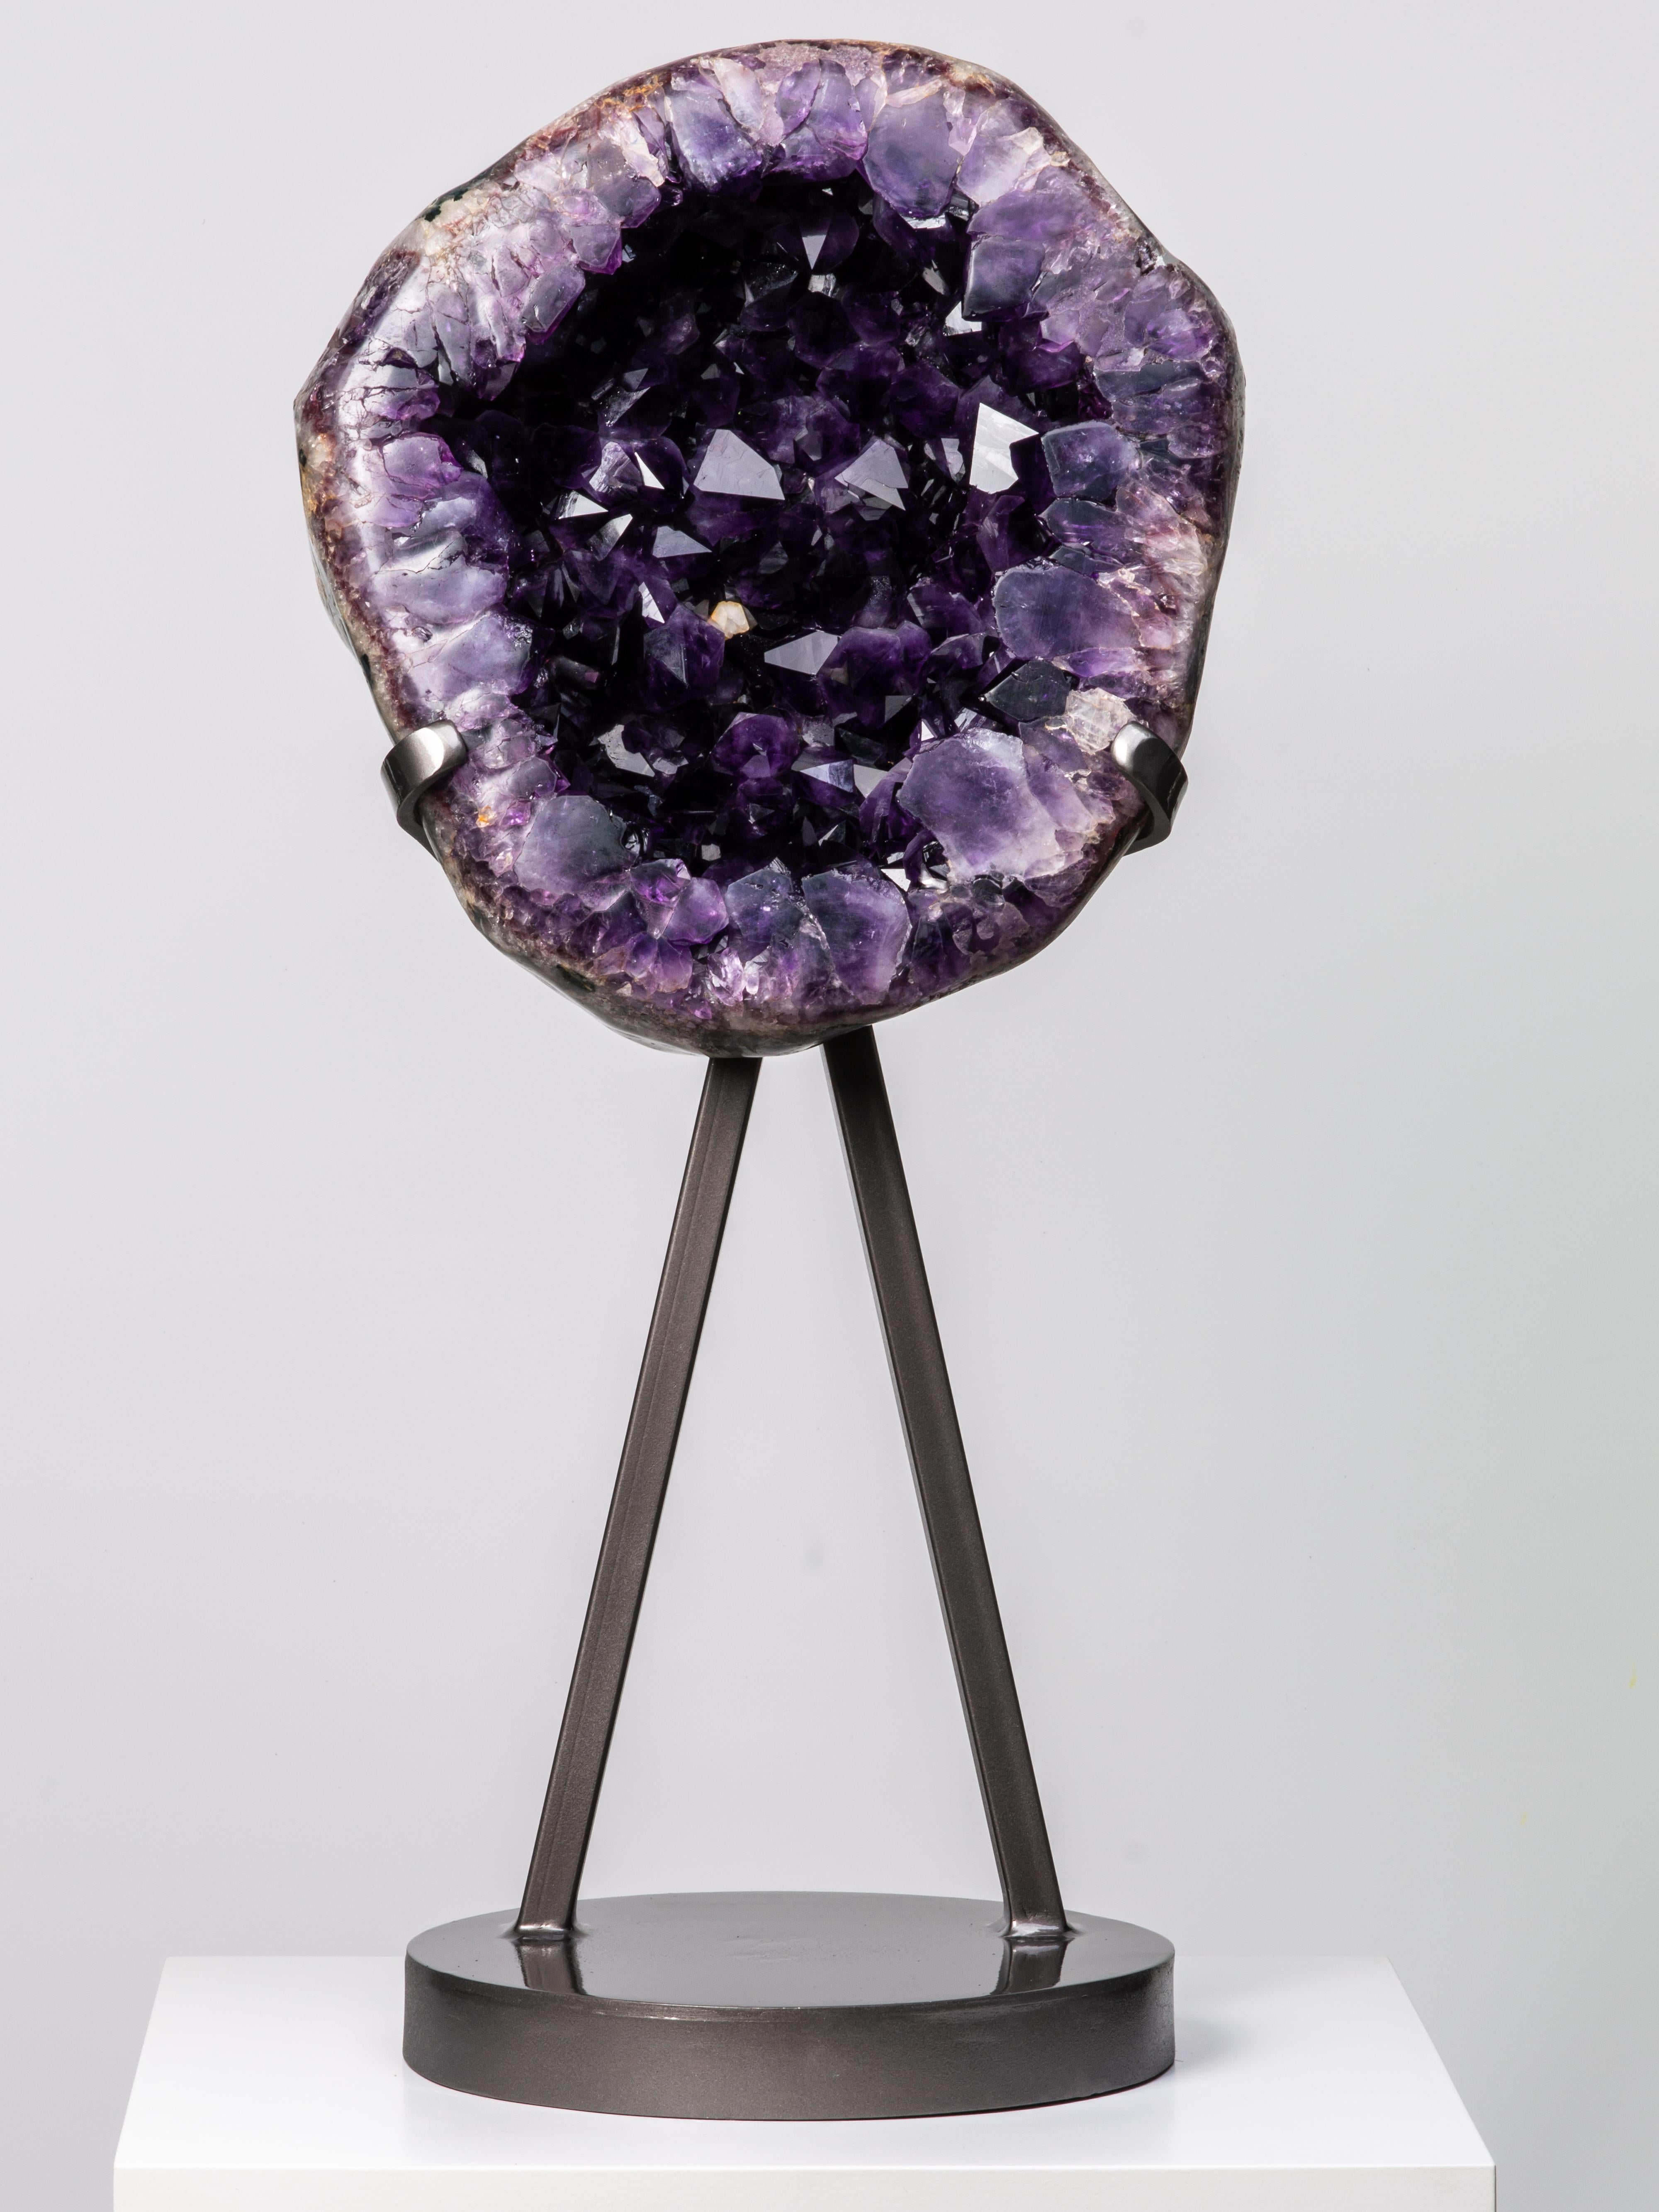 A striking geode slice with very high peaked deep purple amethyst crystals. The
thick, prominent crystals allow us to appreciate the intense cloudy quality of the
finest amethyst. A small creamy calcite can be found to the interior. The